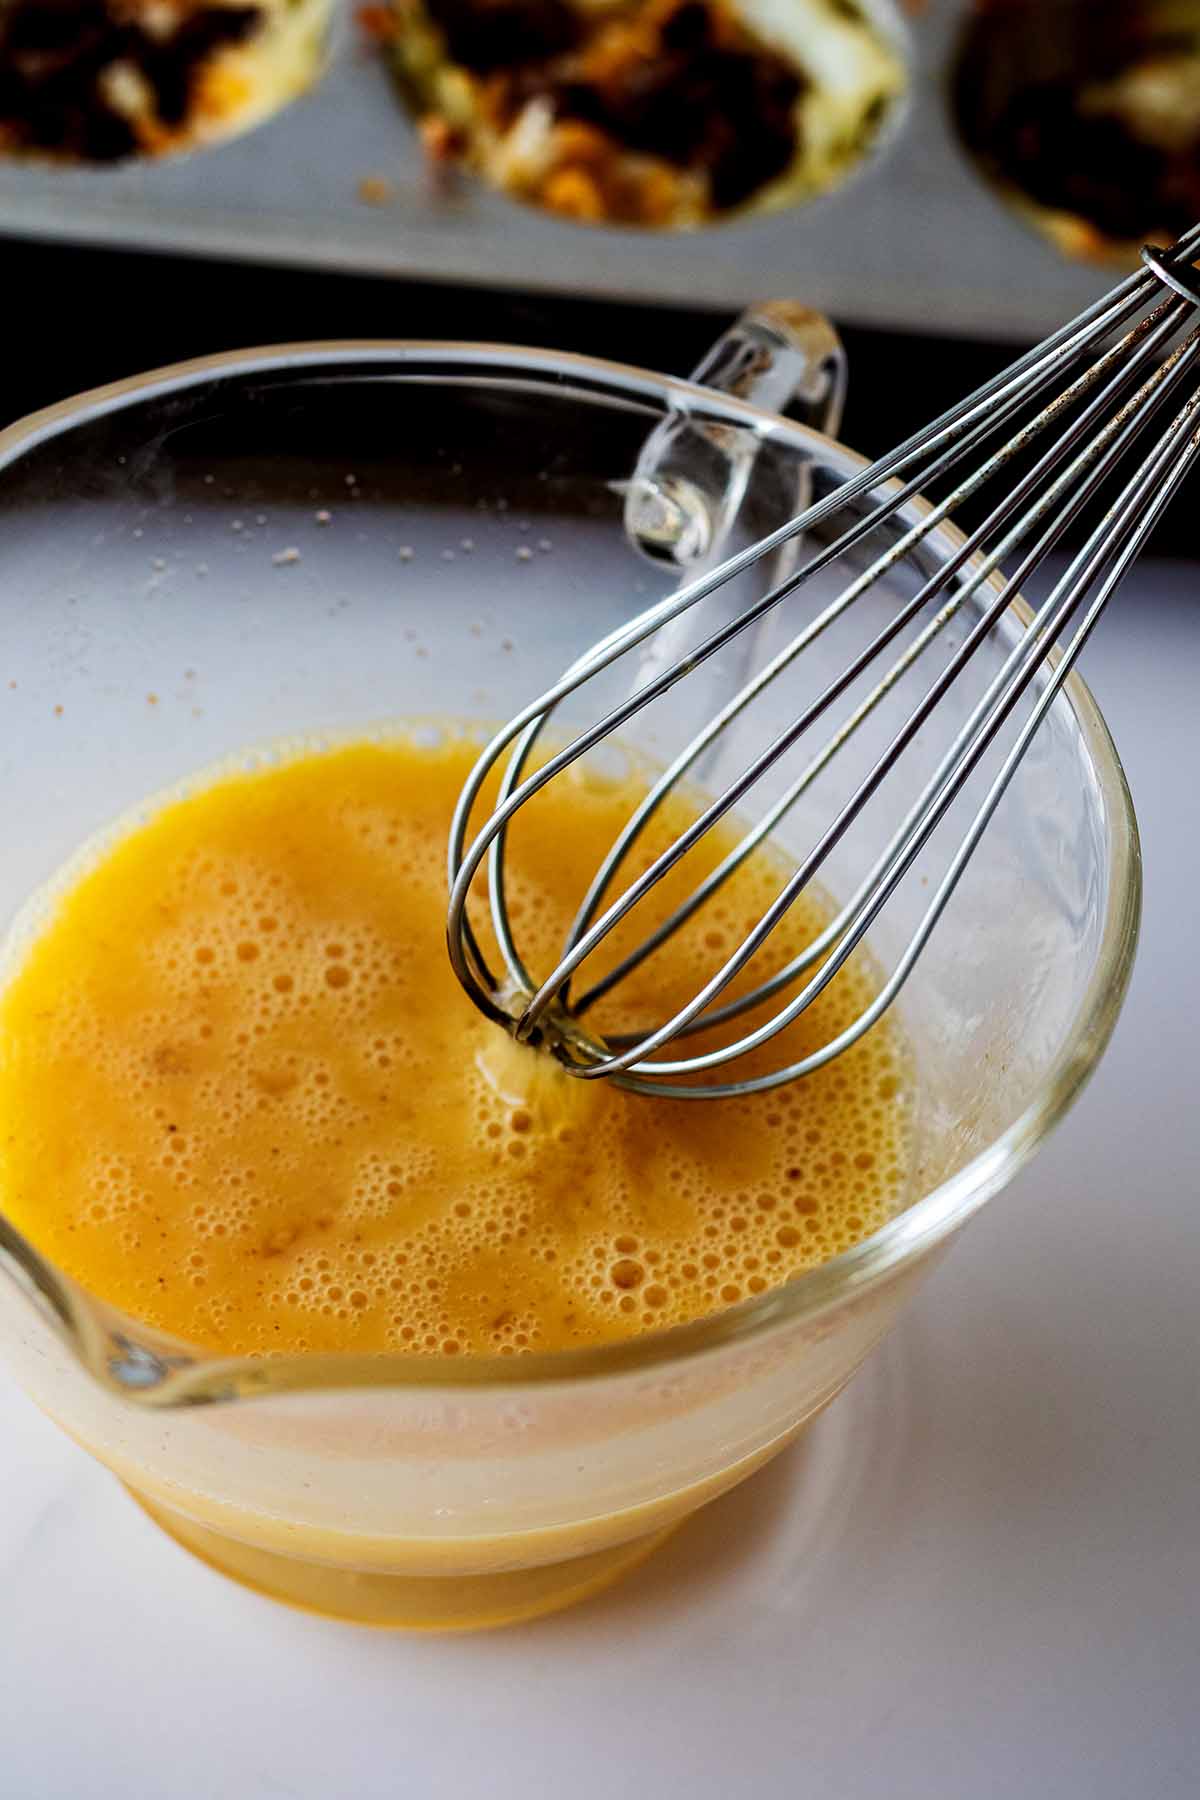 Beaten and frothy egg mixture in a glass carafe